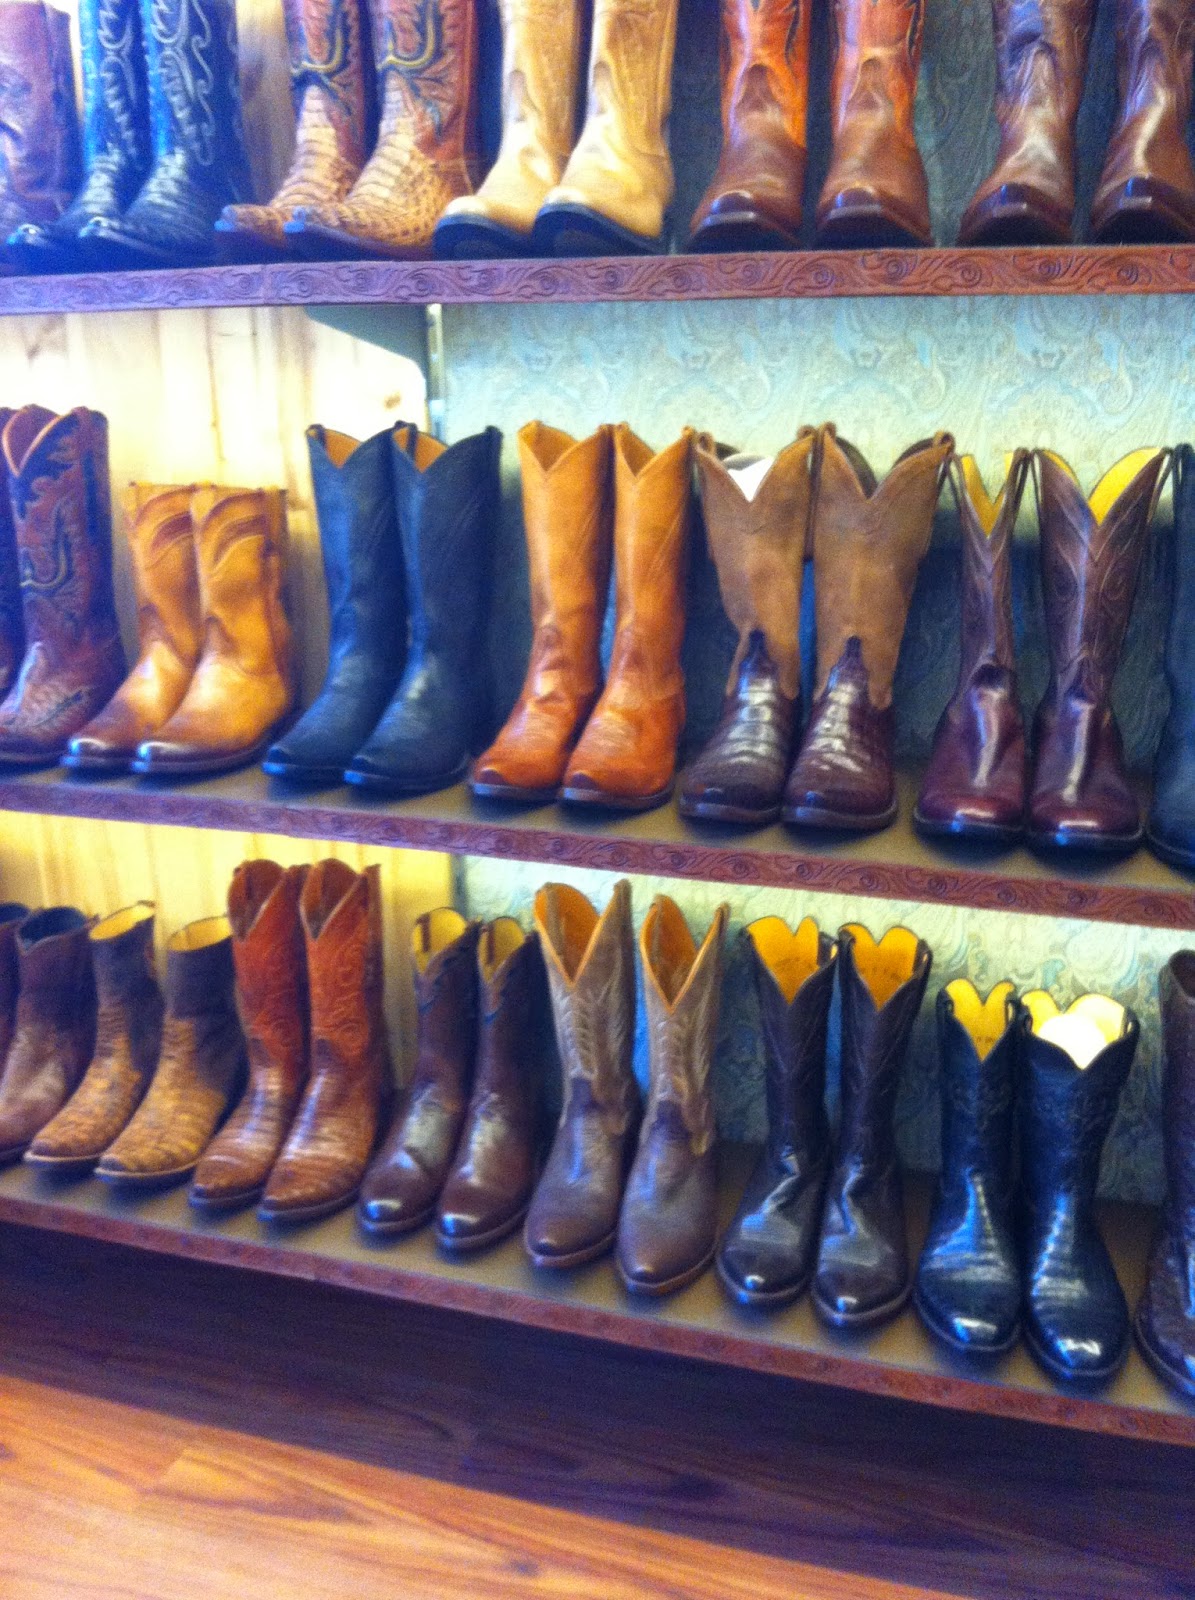 Boots everywhere